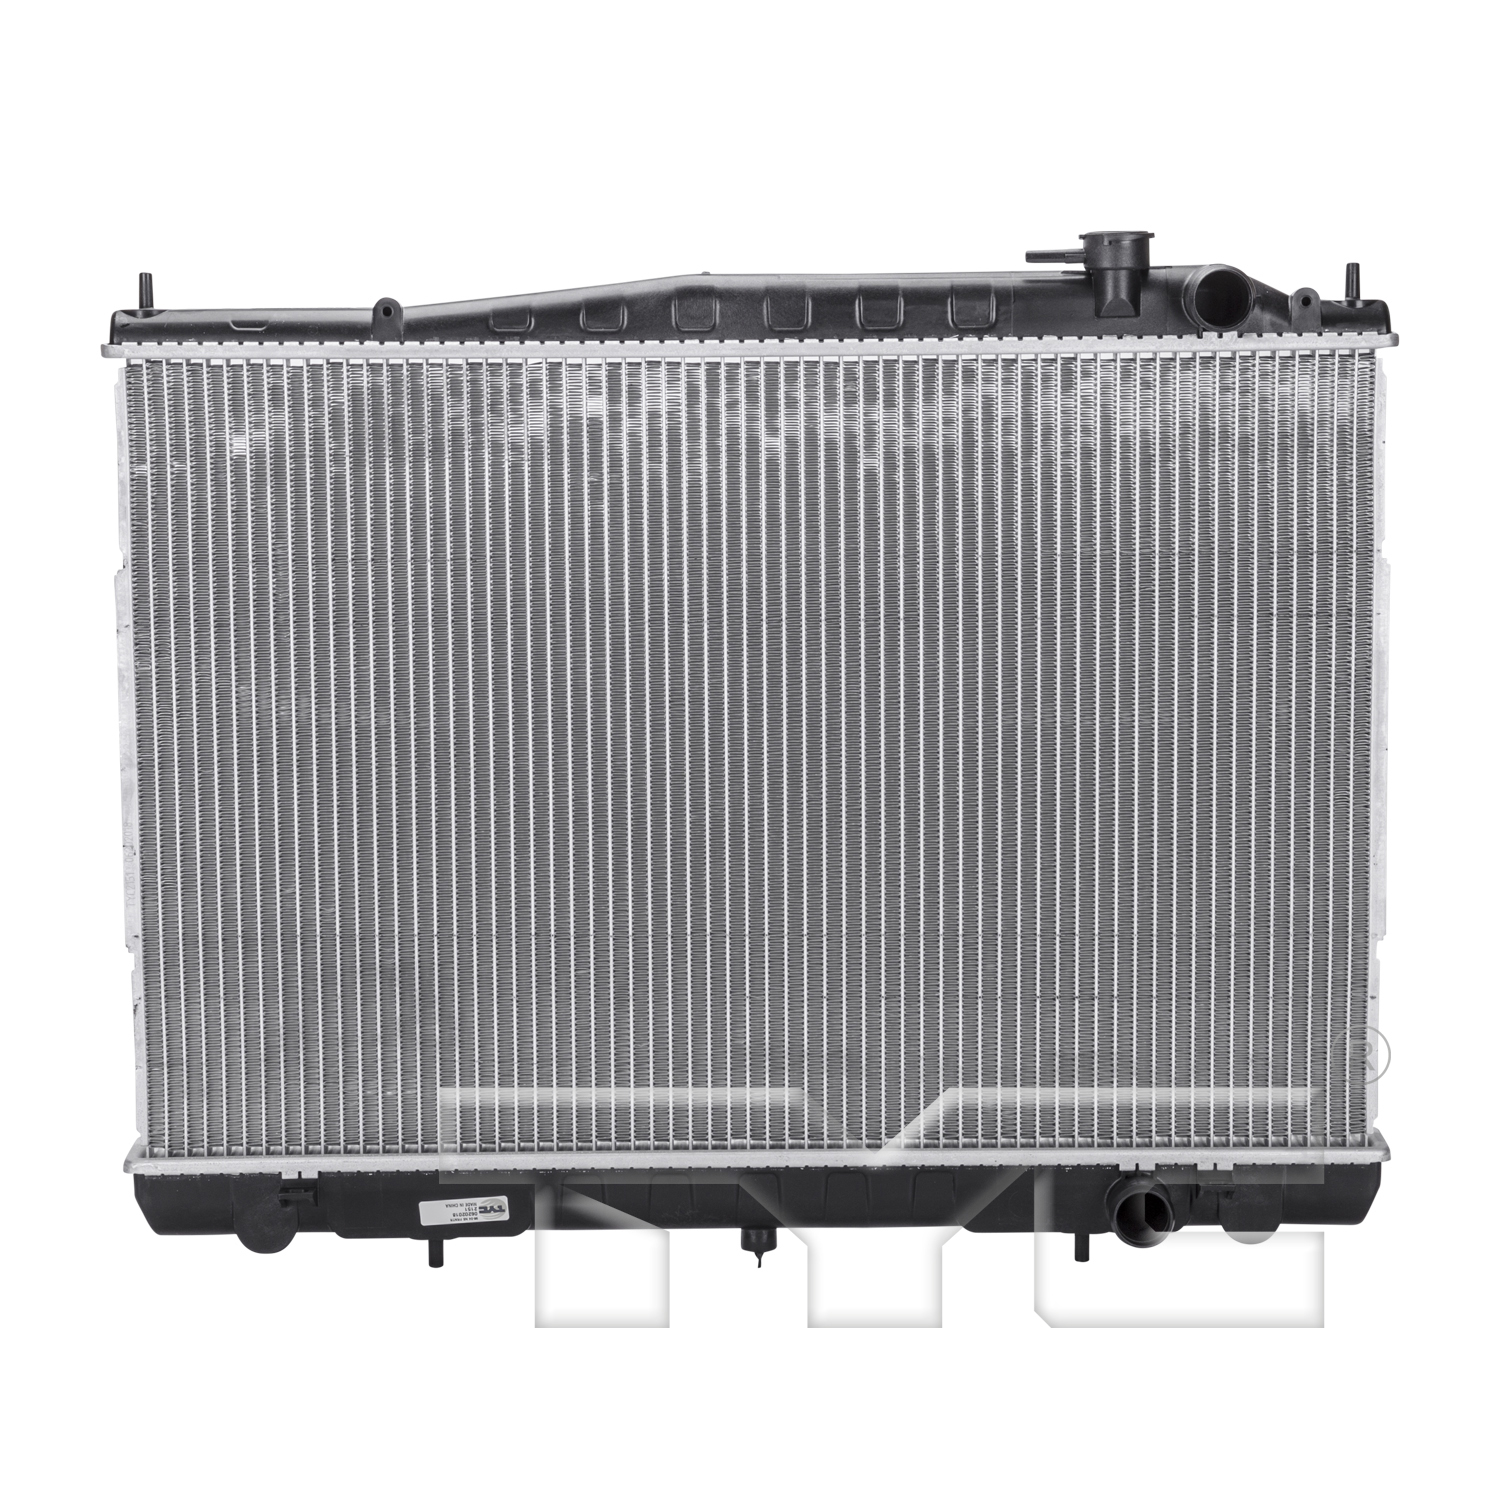 Aftermarket RADIATORS for NISSAN - FRONTIER, FRONTIER,01-04,Radiator assembly